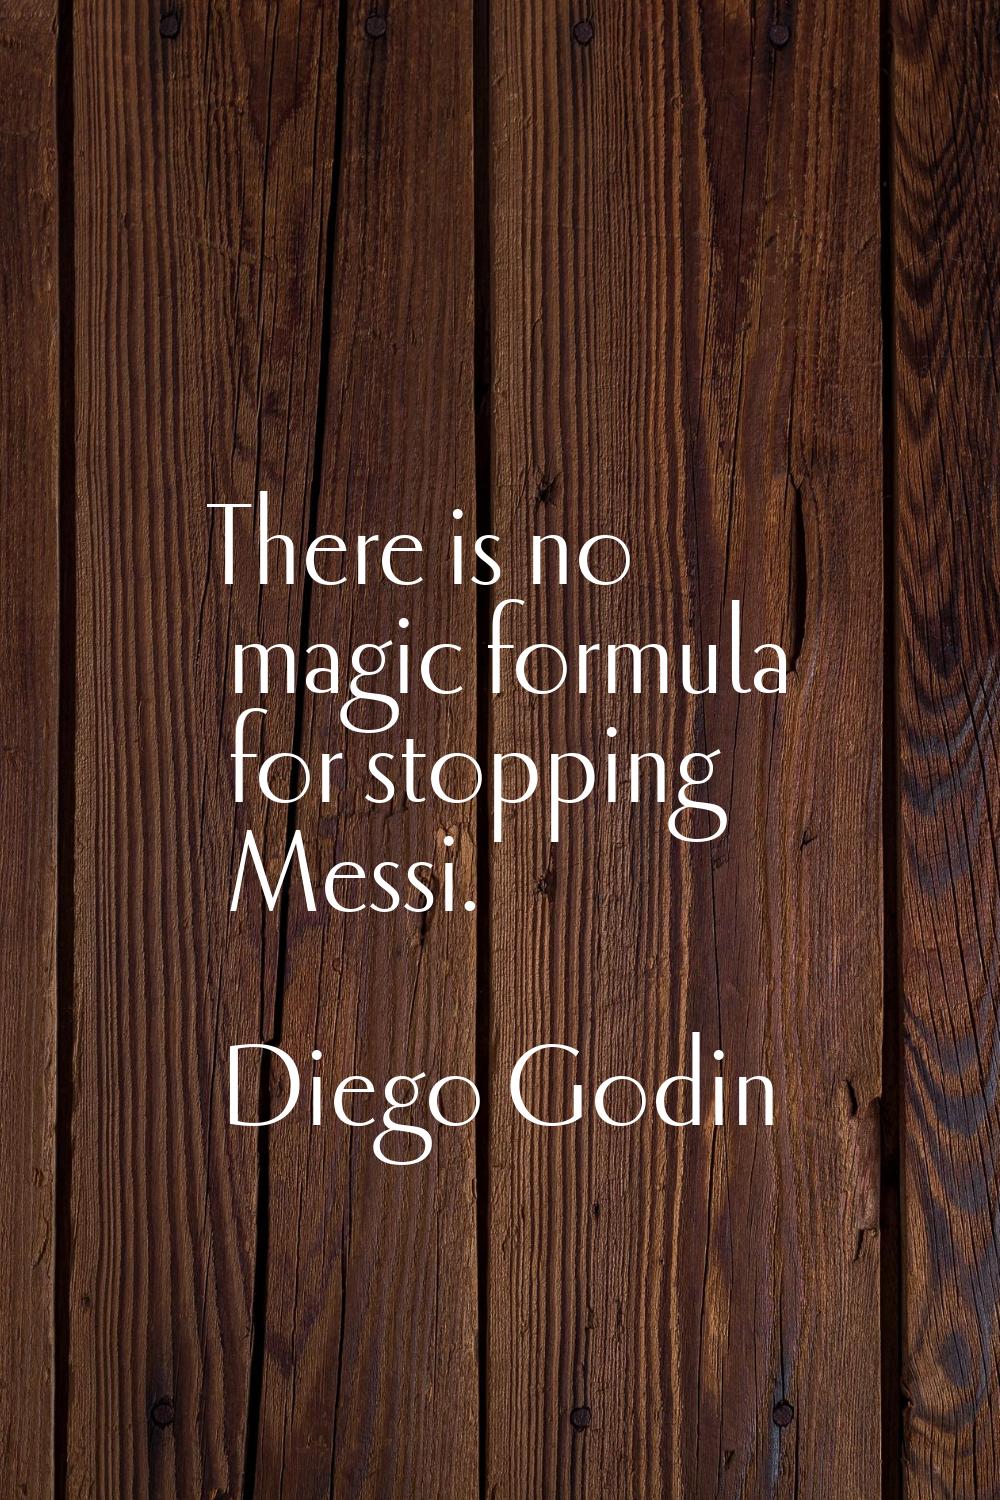 There is no magic formula for stopping Messi.